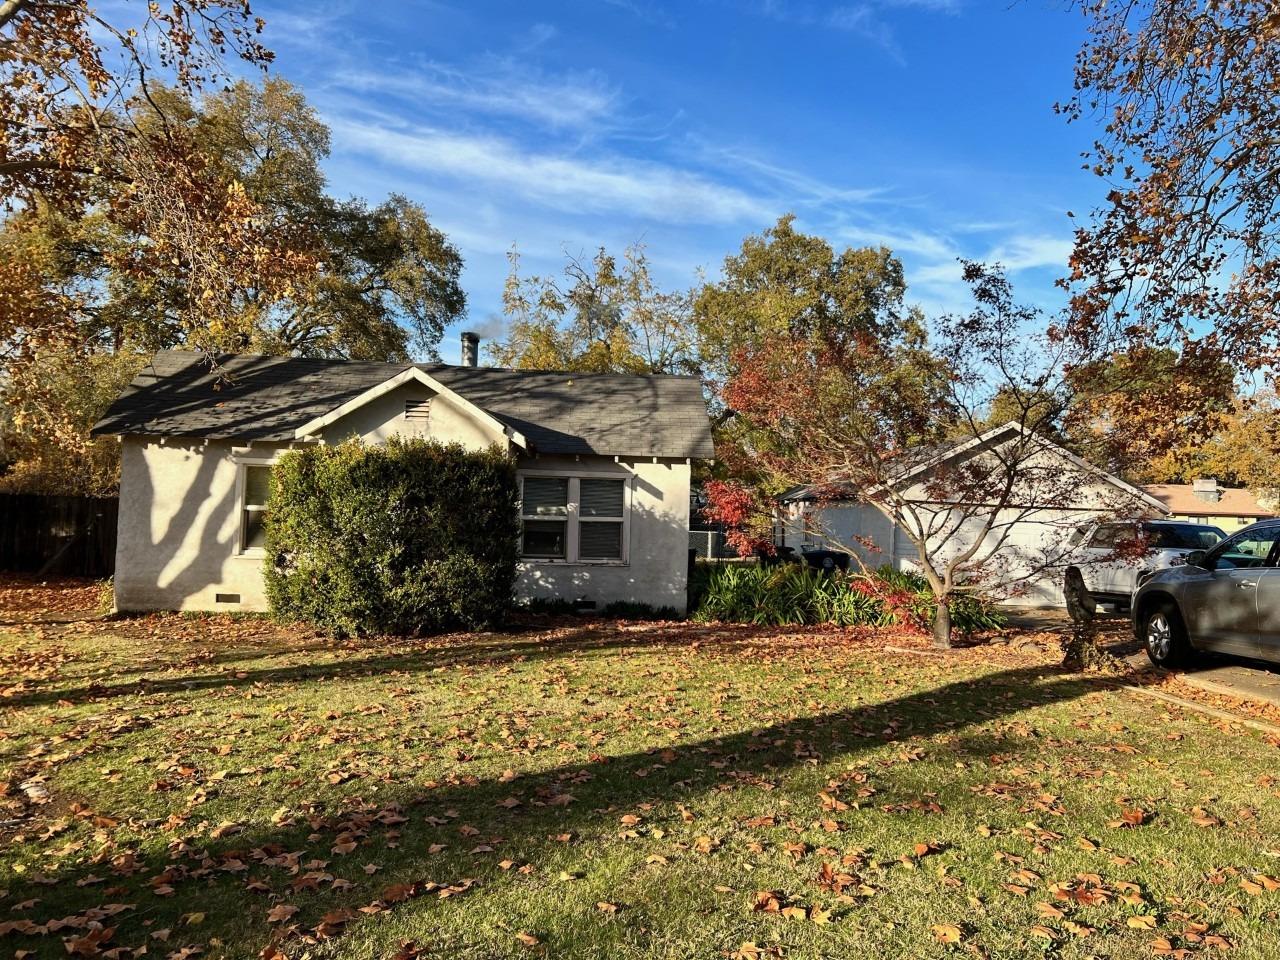 Country feel in the heart of Citrus Heights. On a half acre, this 2 bed / 1 bath FIXER sits on a qui